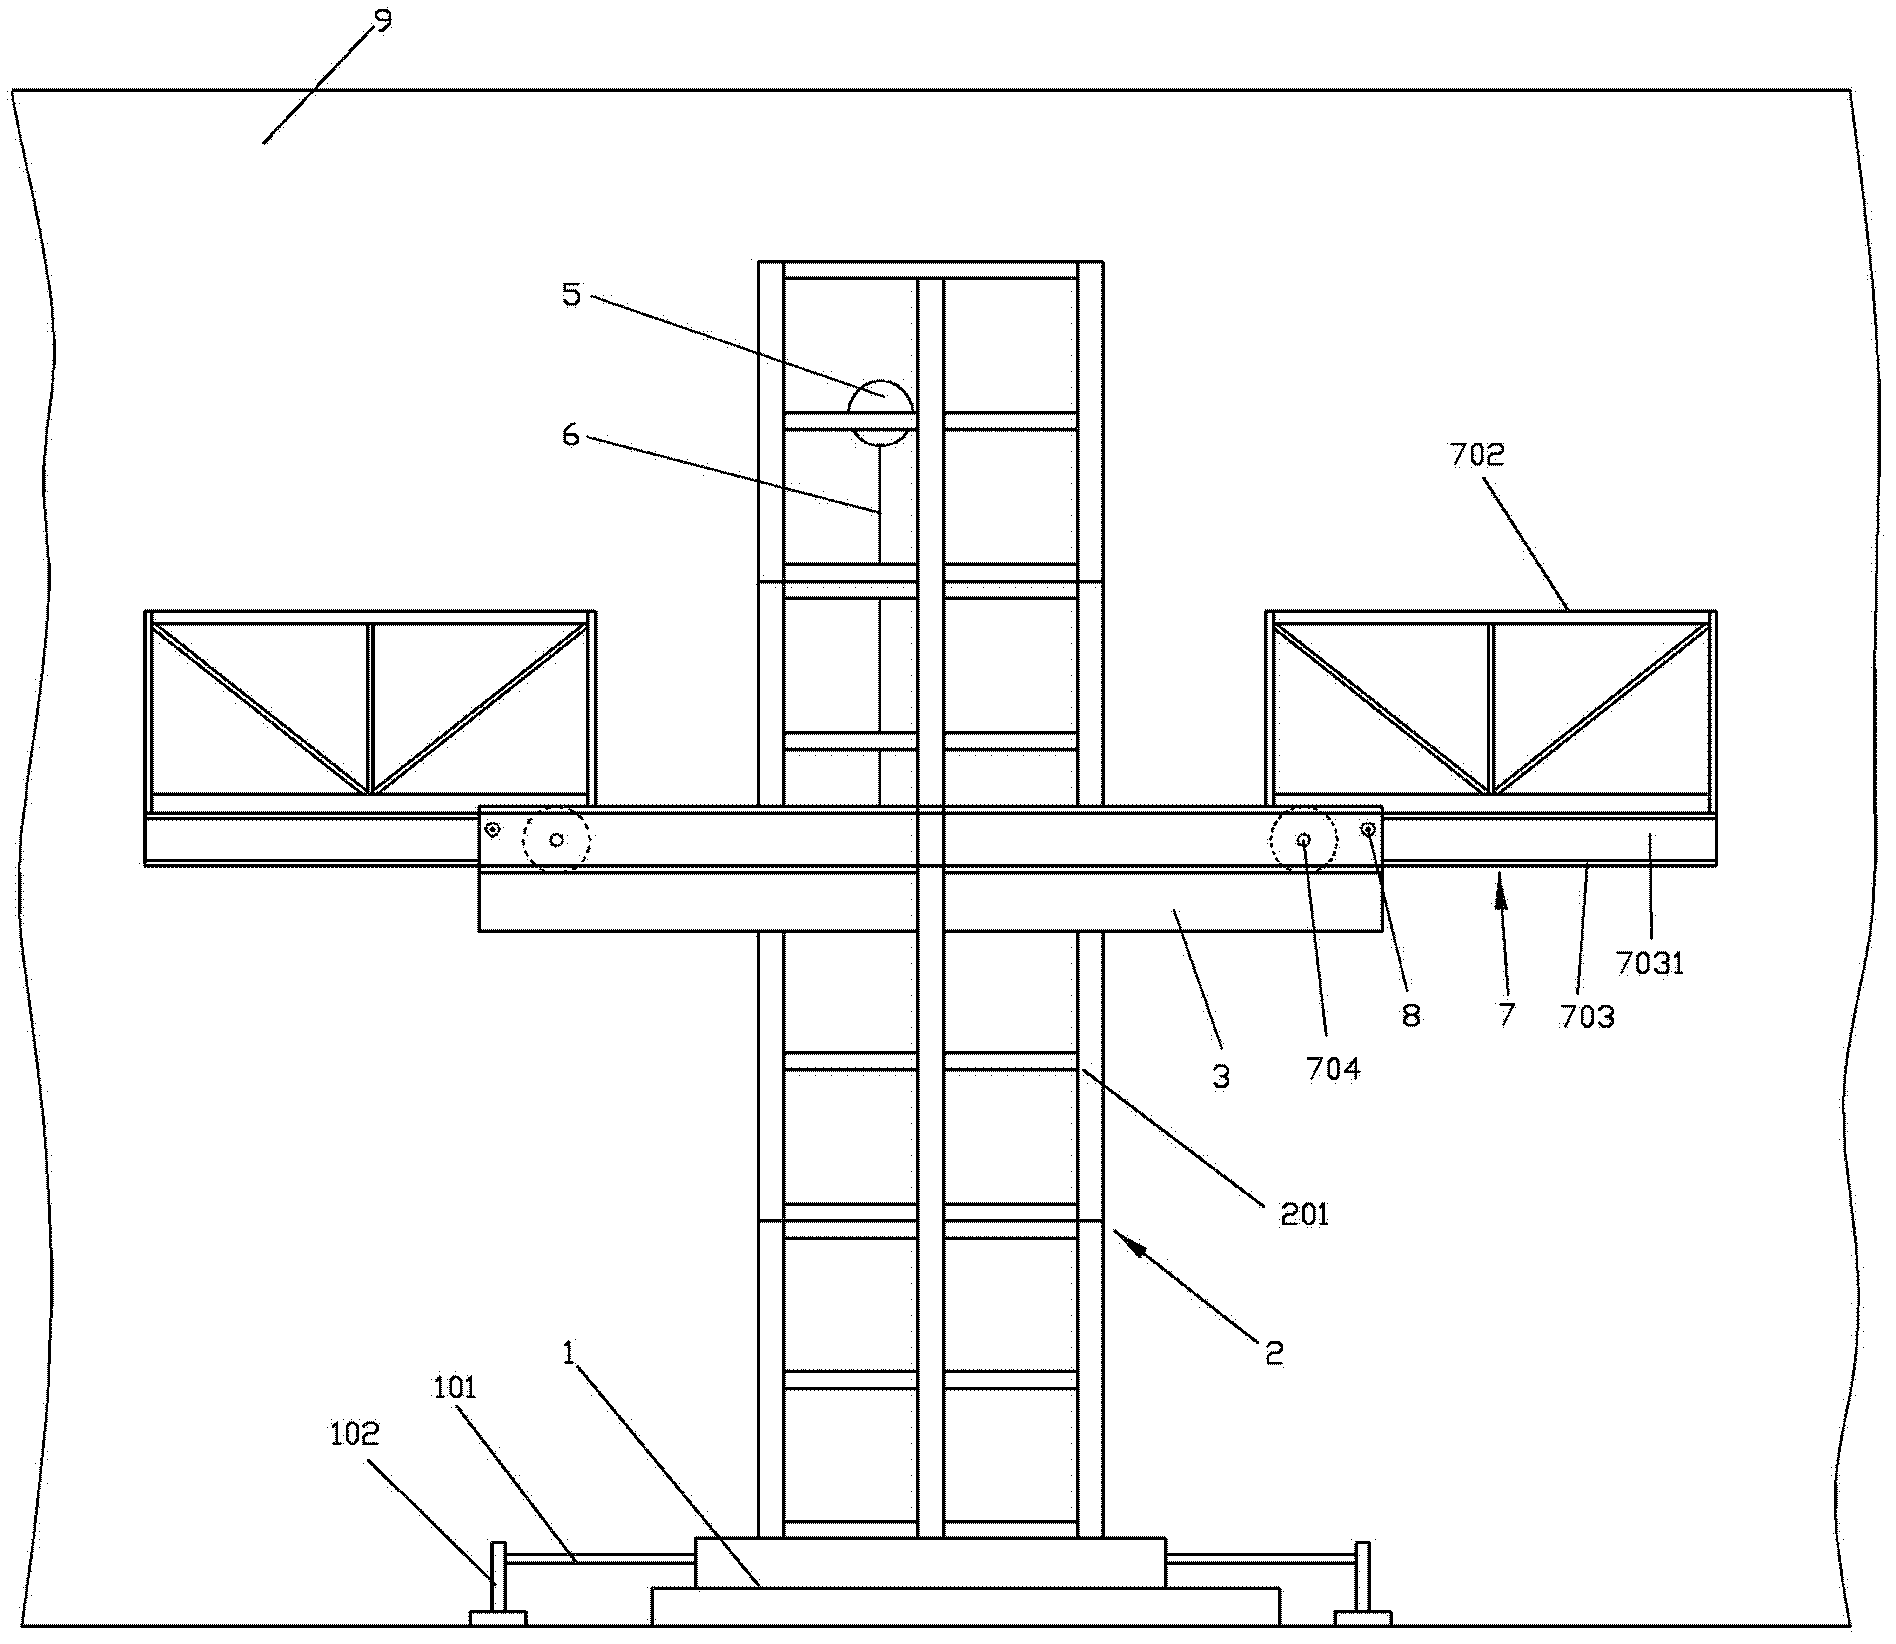 Self-elevating scaffold provided with telescoping platforms for building construction